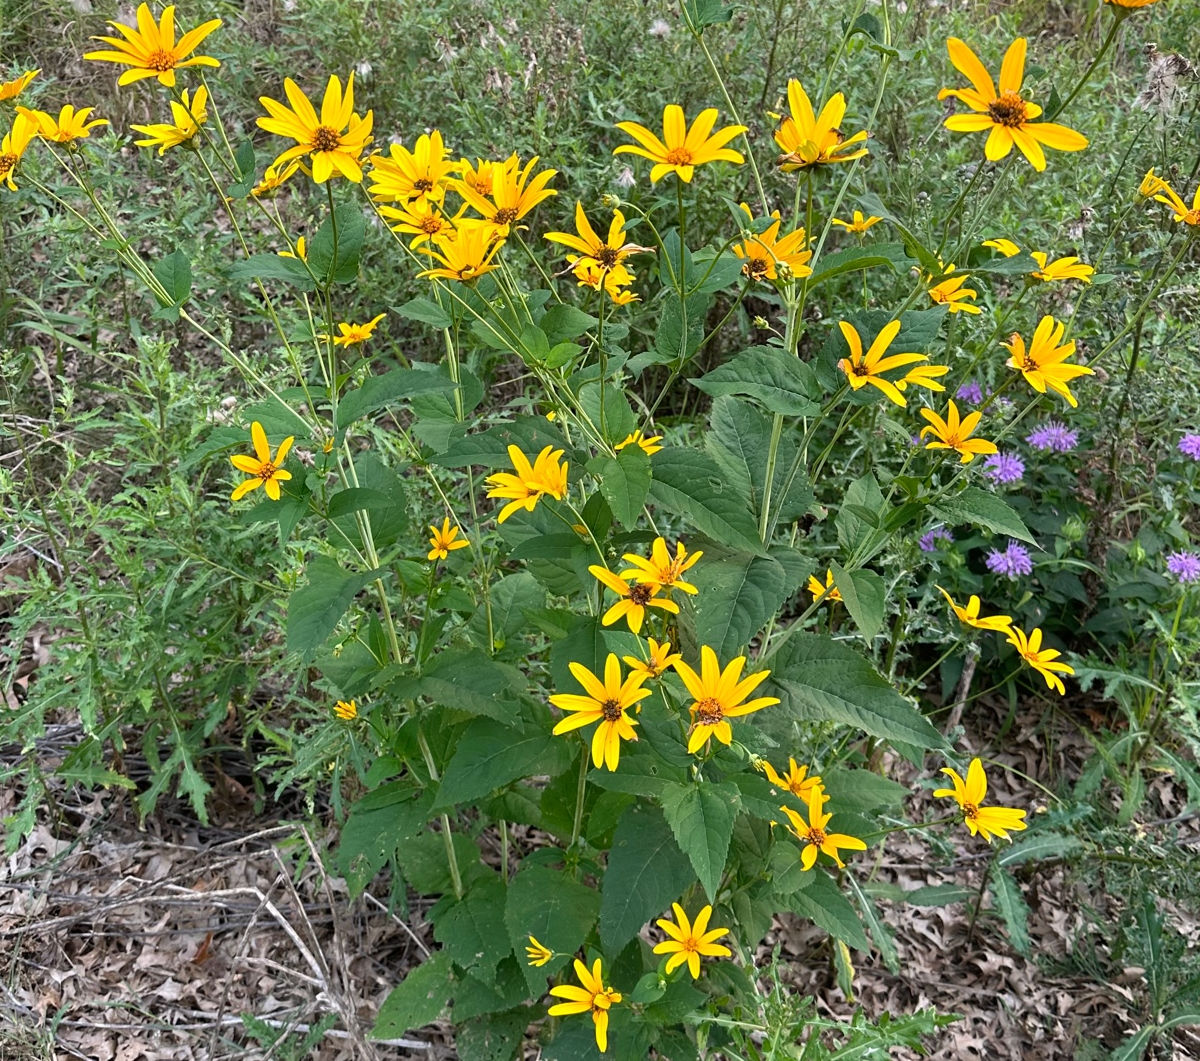 Woodland sunflower in a field. Very tall with yellow single flowers and golden centers.